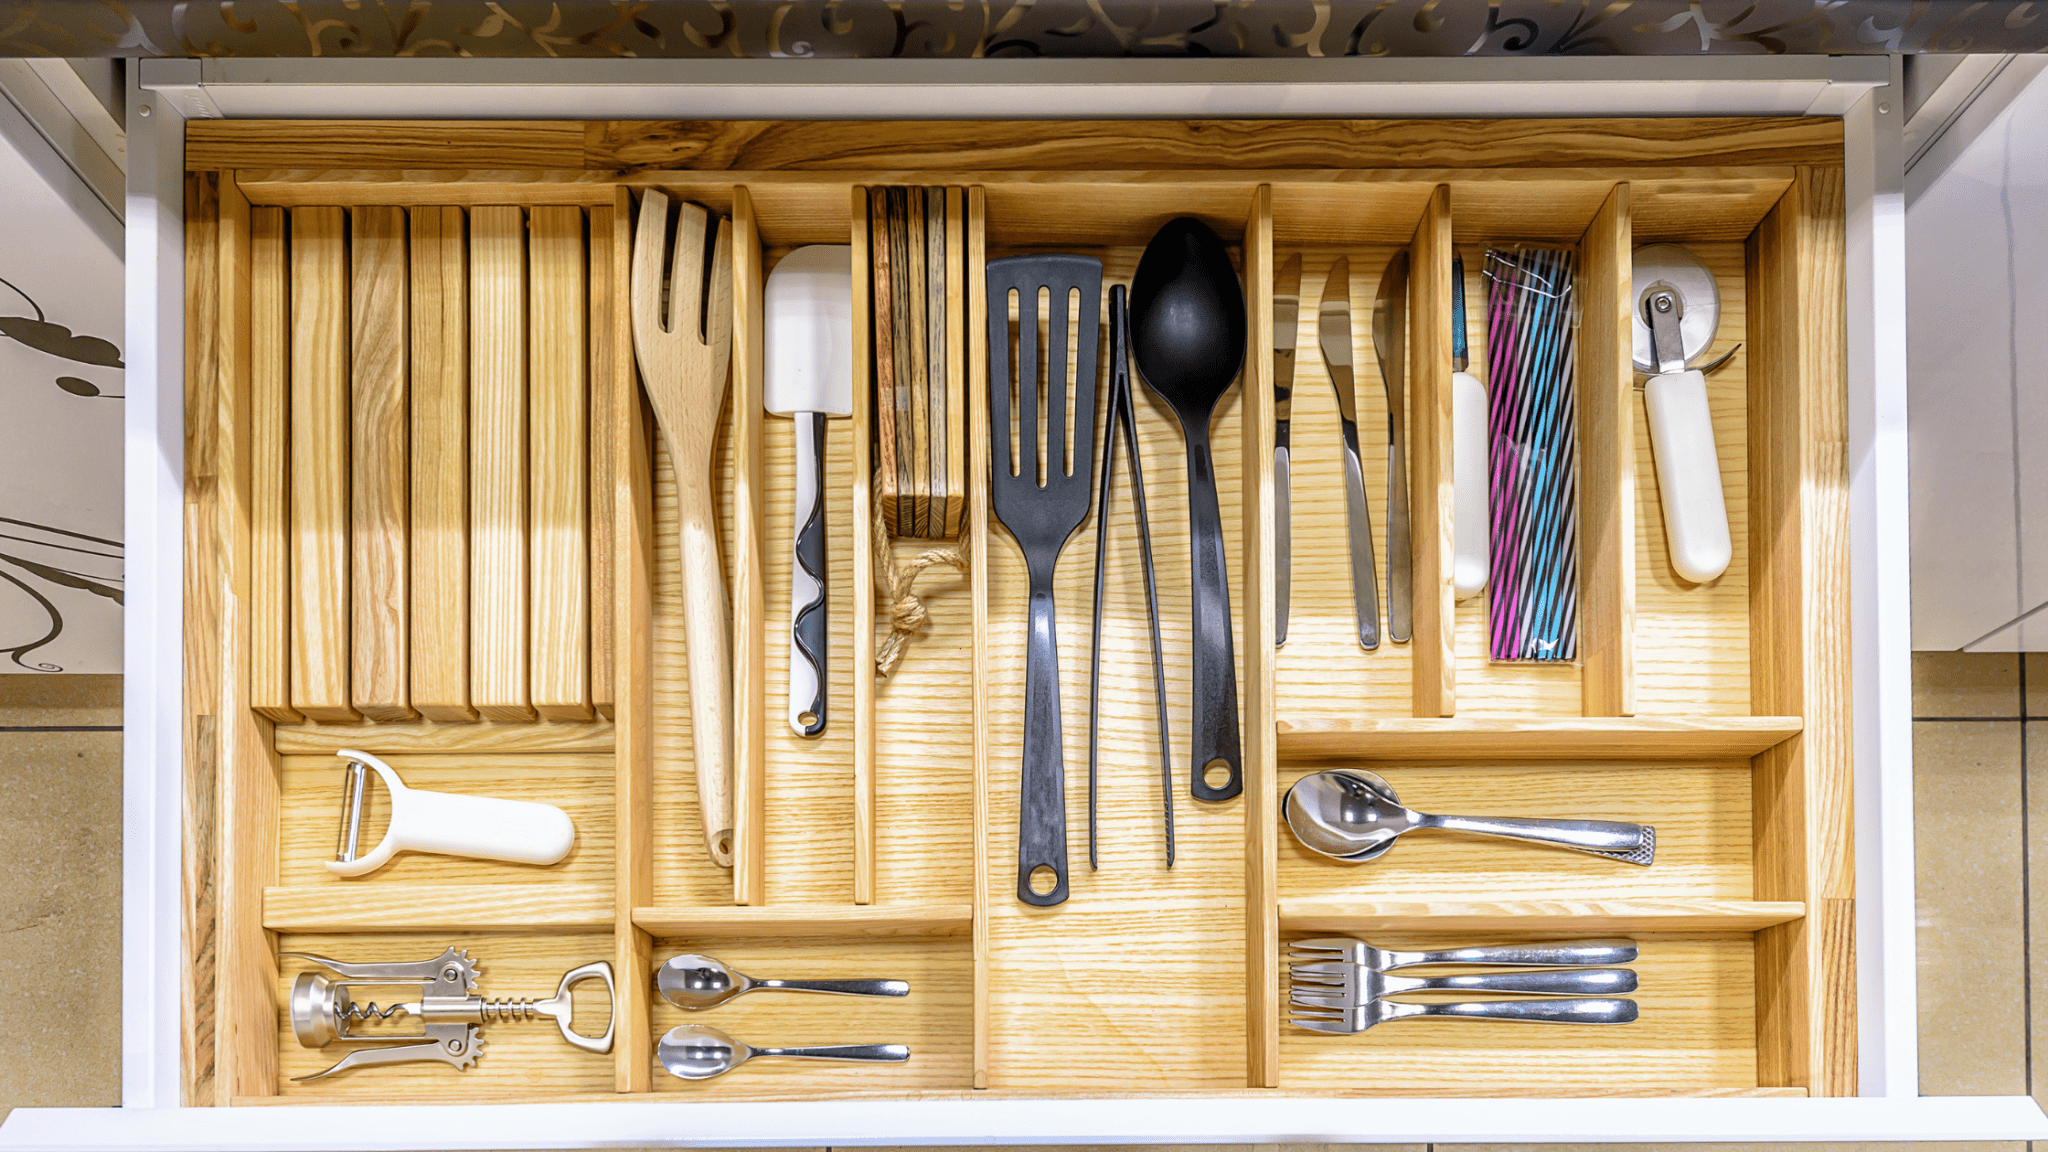 Homeowner's Guide to Organizing Your Kitchen